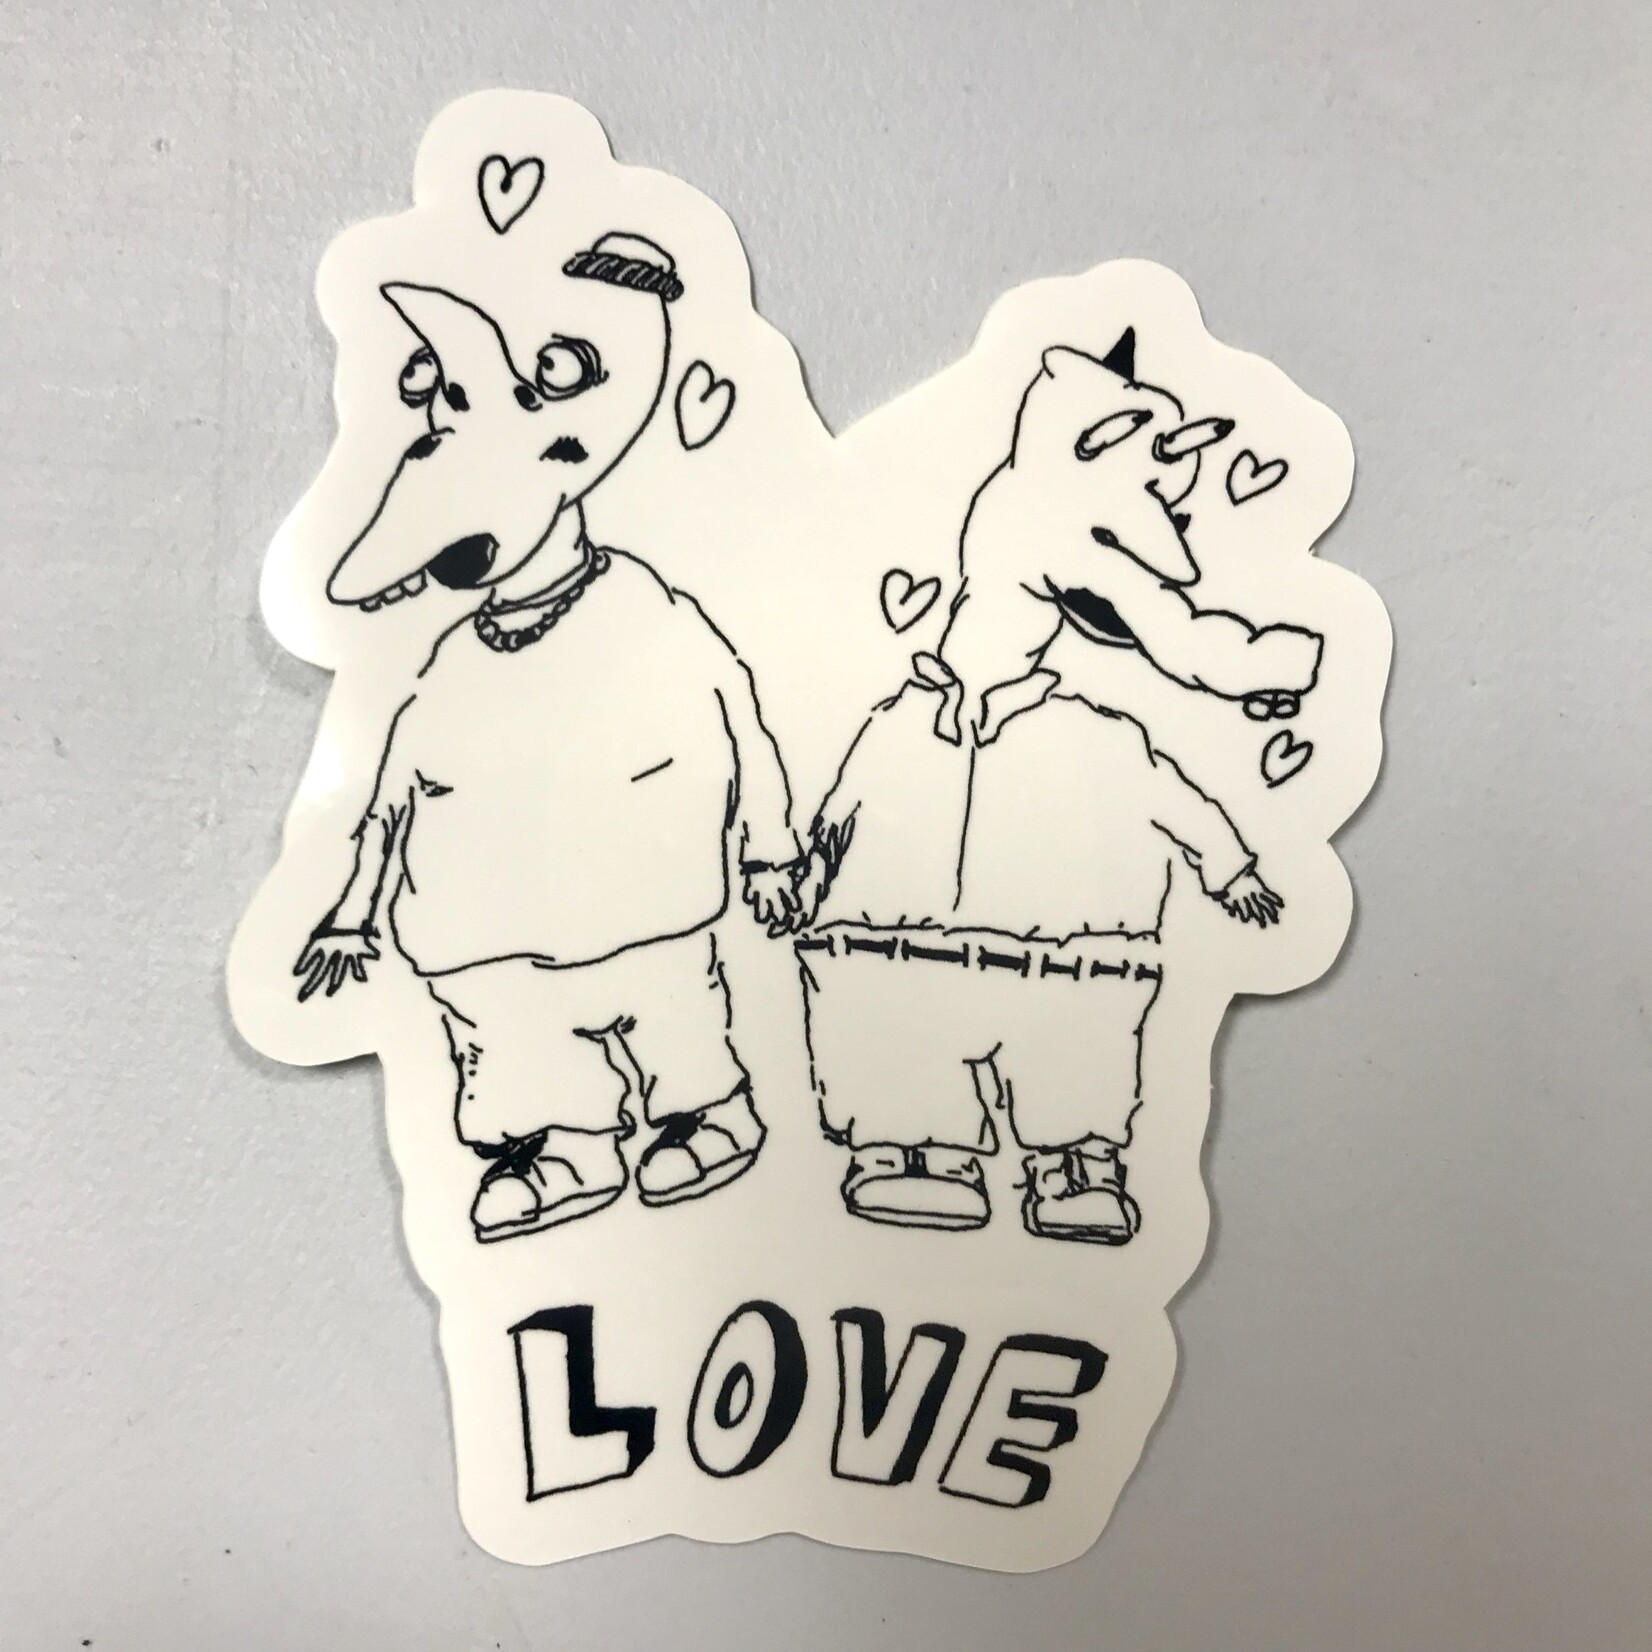 Pictures By Phoenix - Love - Sticker (NEW)